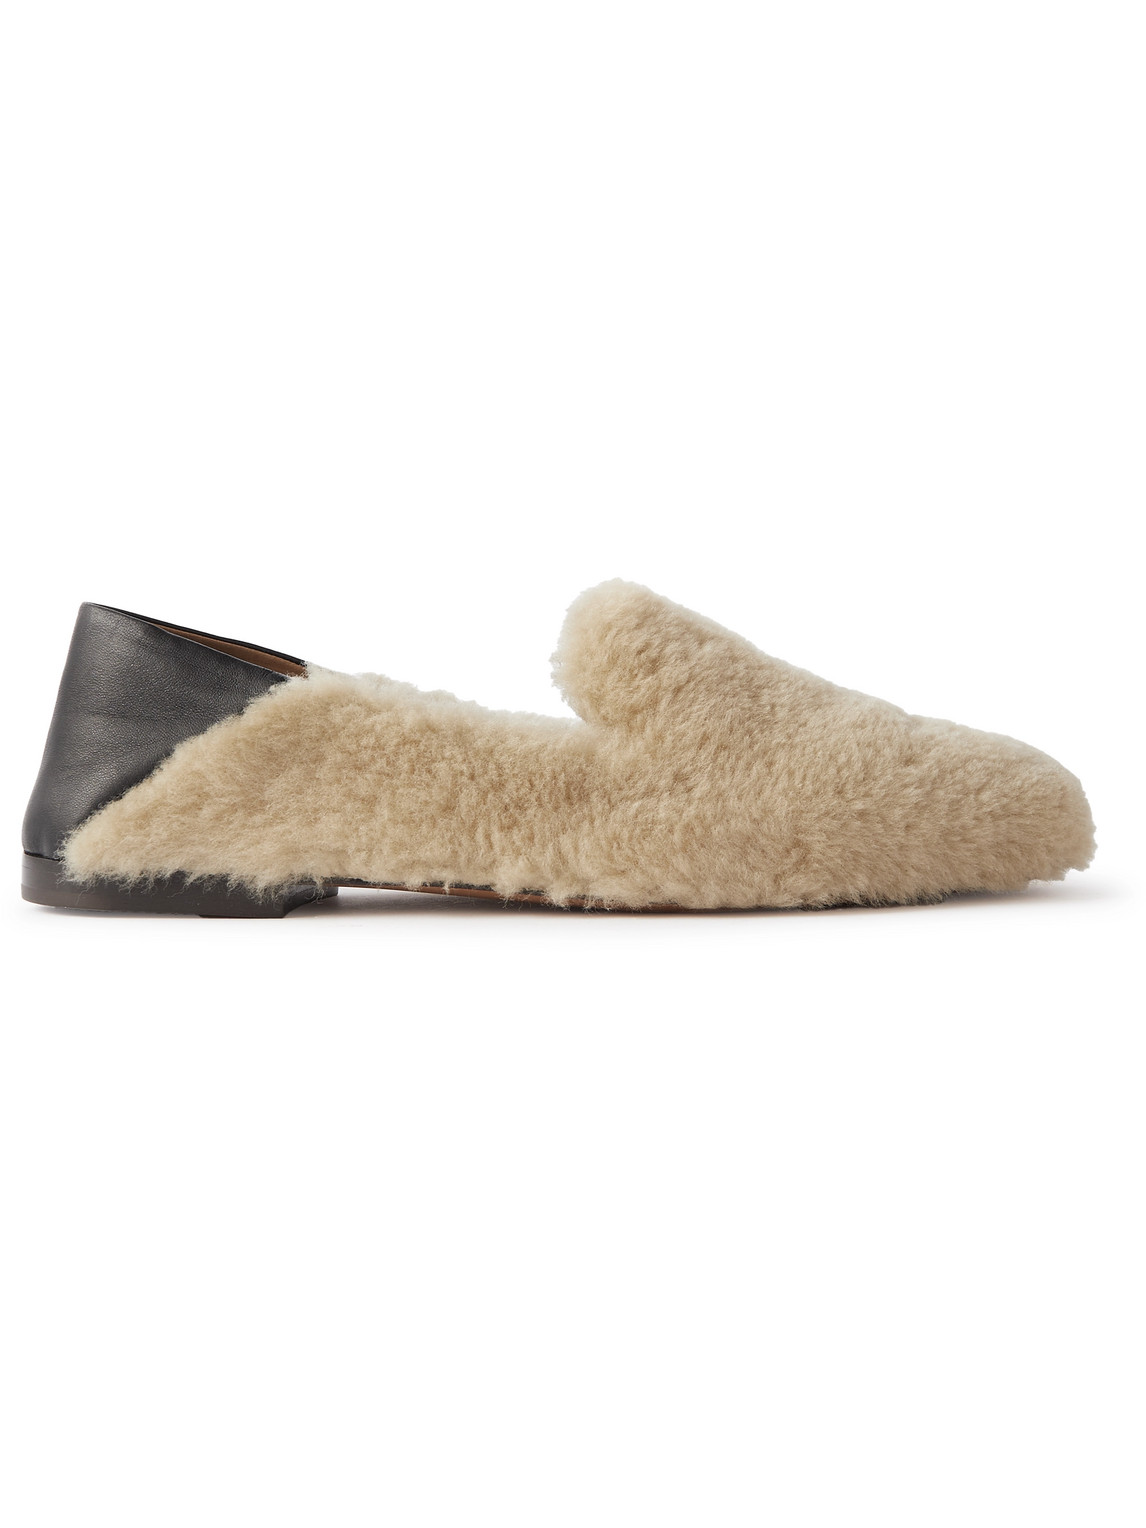 WALES BONNER LEATHER-TRIMMED SHEARLING COLLAPSIBLE-HEEL LOAFERS